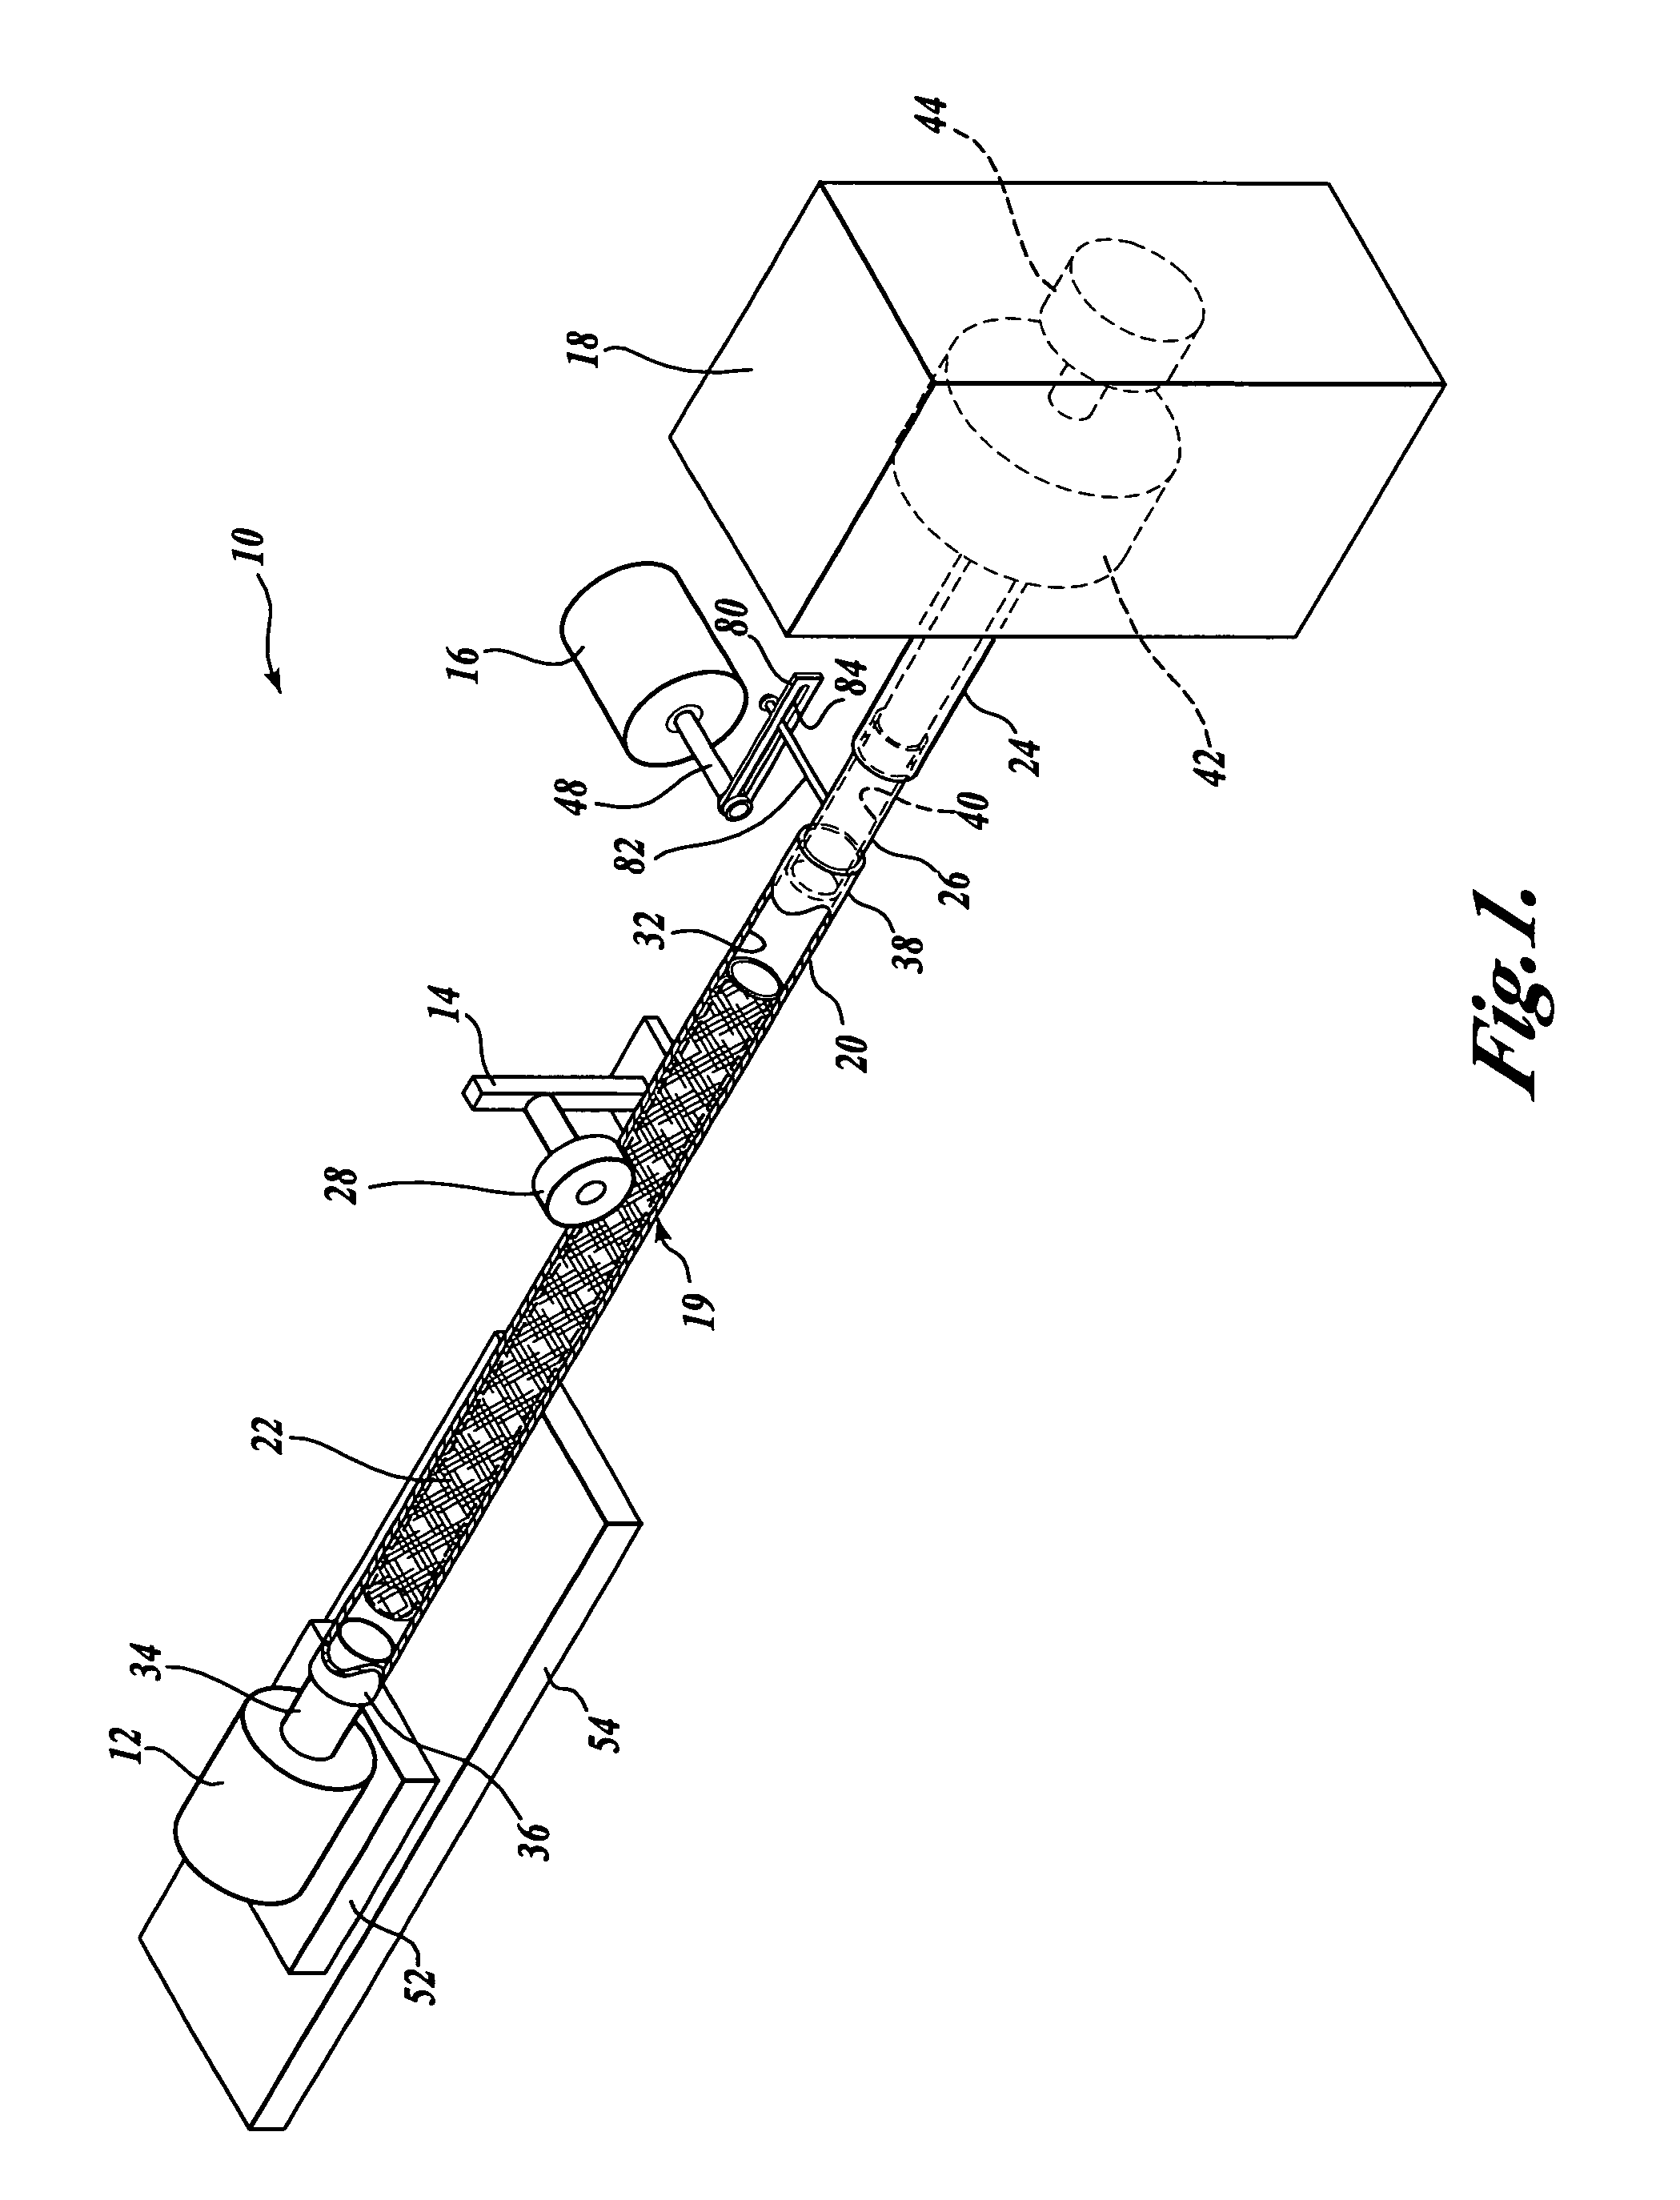 Method and apparatus for vascular durability and fatigue testing